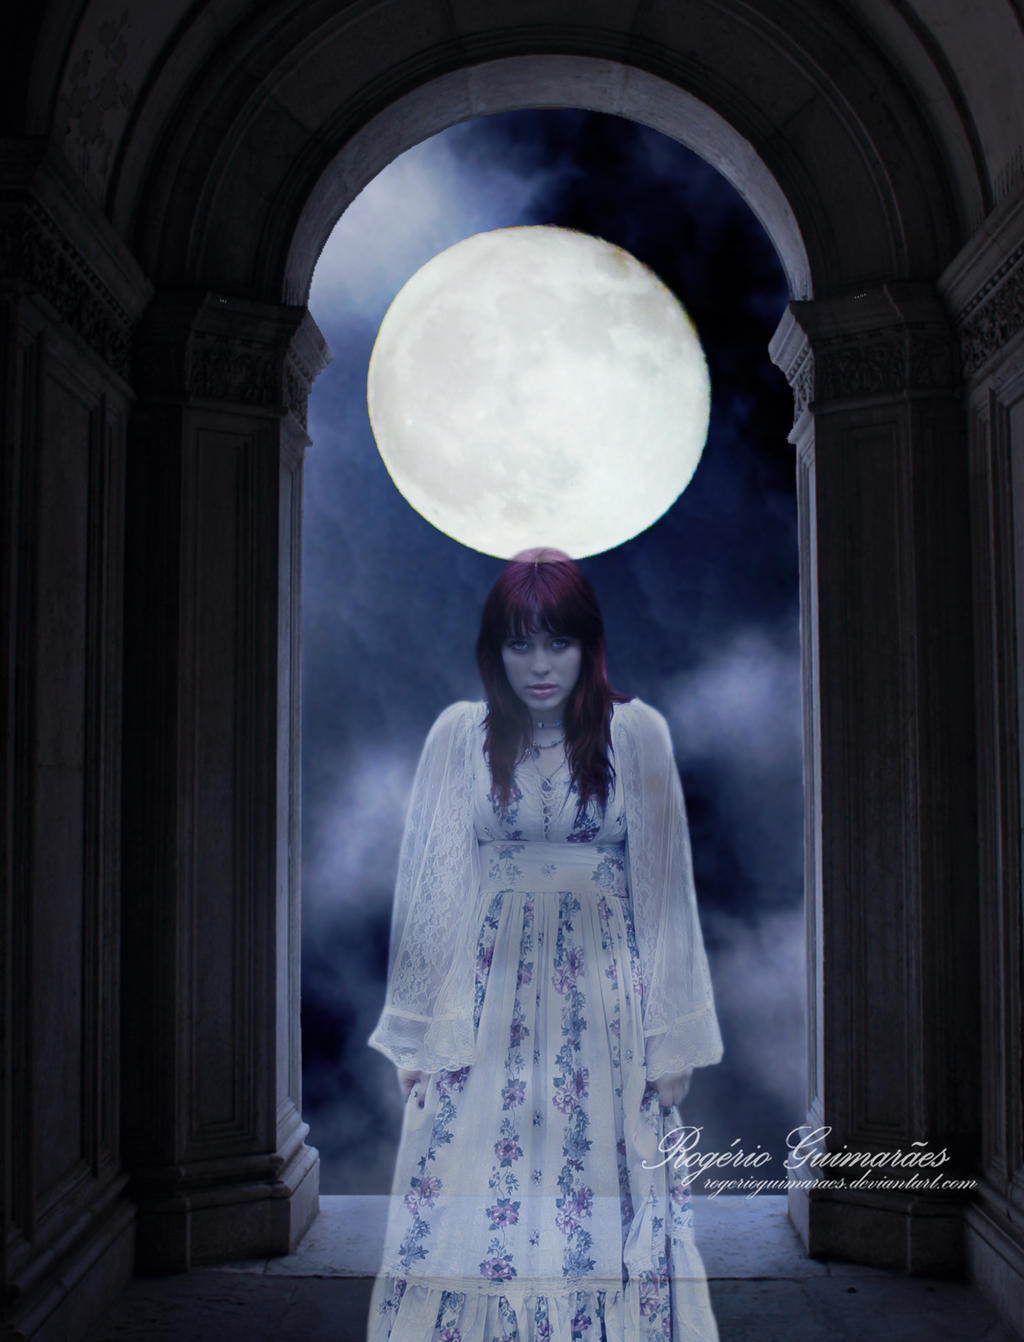 A Lost Soul Under the Moon